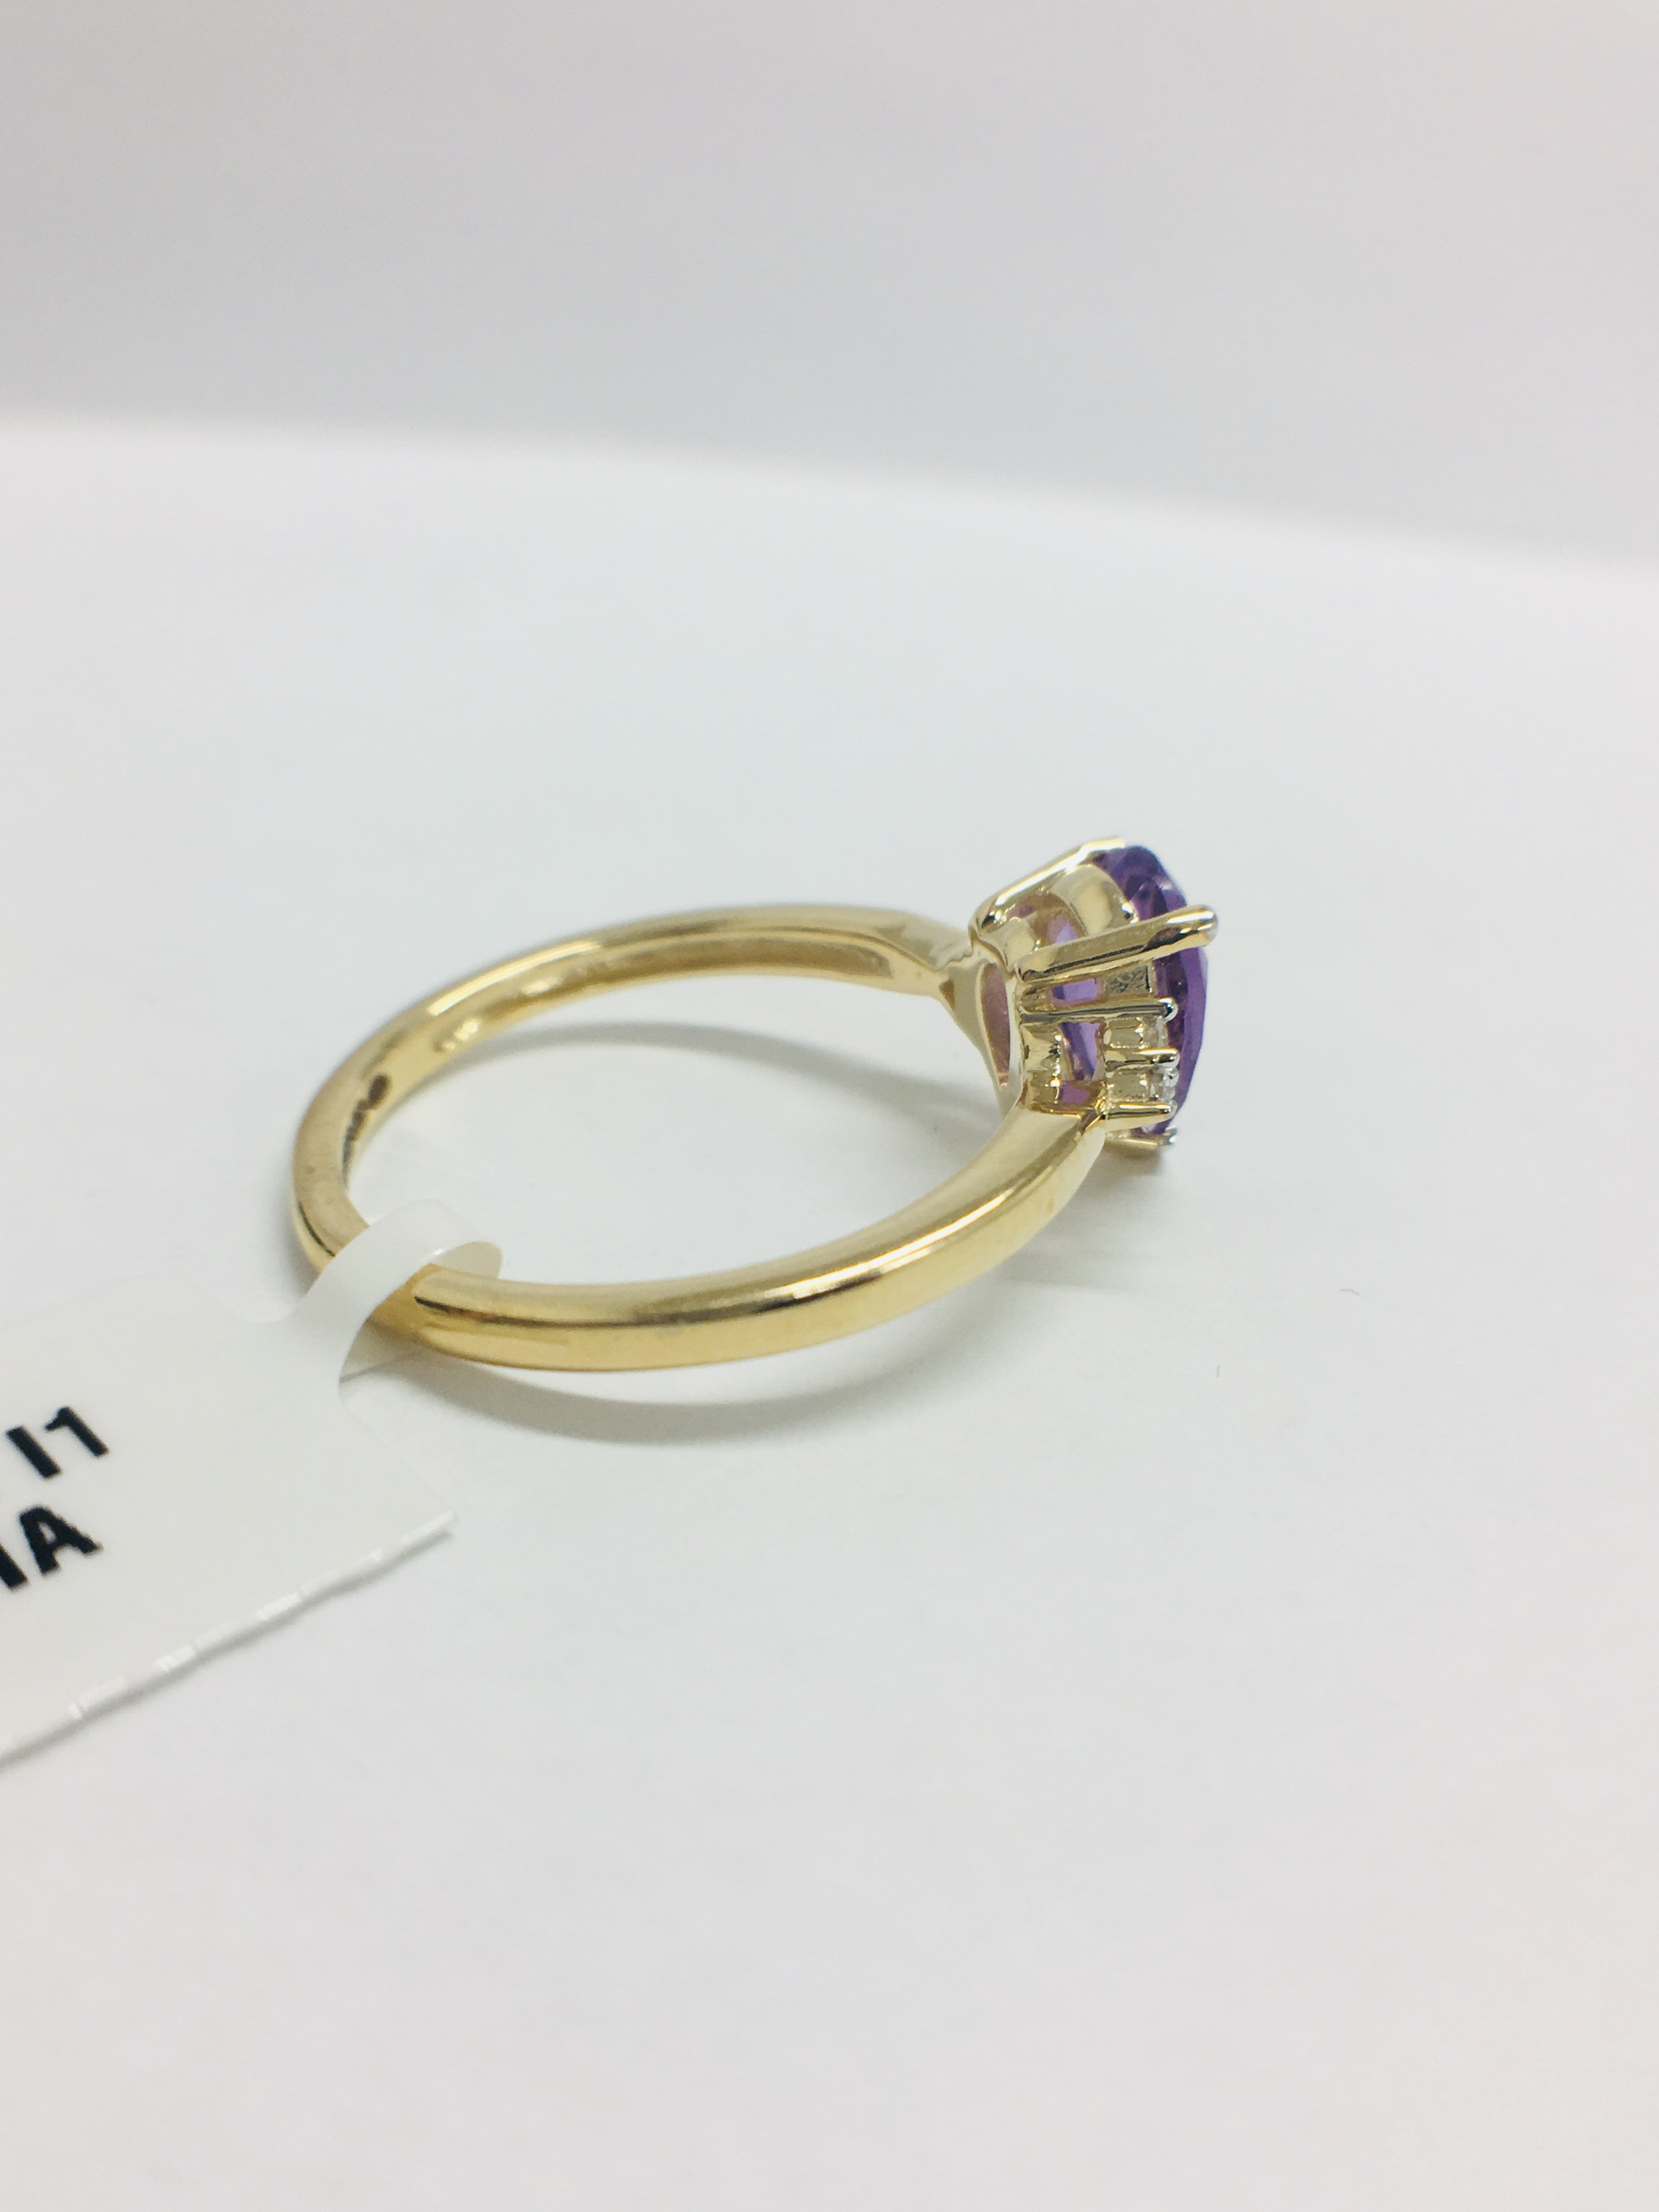 9Ct Yellow Gold Amethyst Diamond Navette Style Dress Ring, - Image 6 of 10